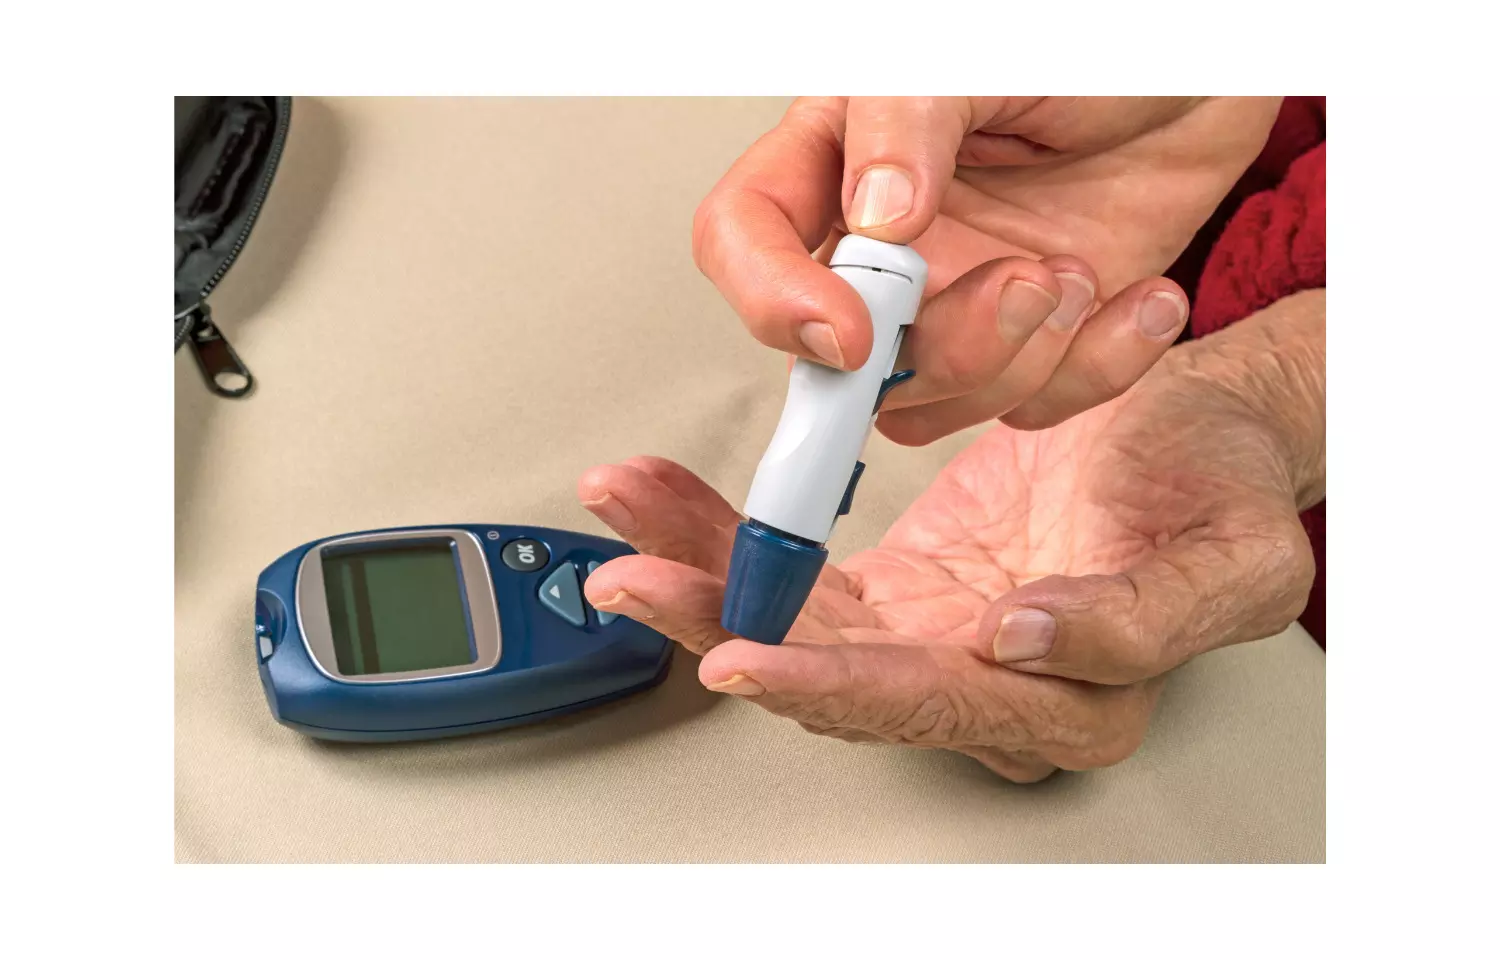 Fully closed-loop insulin therapy safe, effective in diabetes patients requiring dialysis: Study